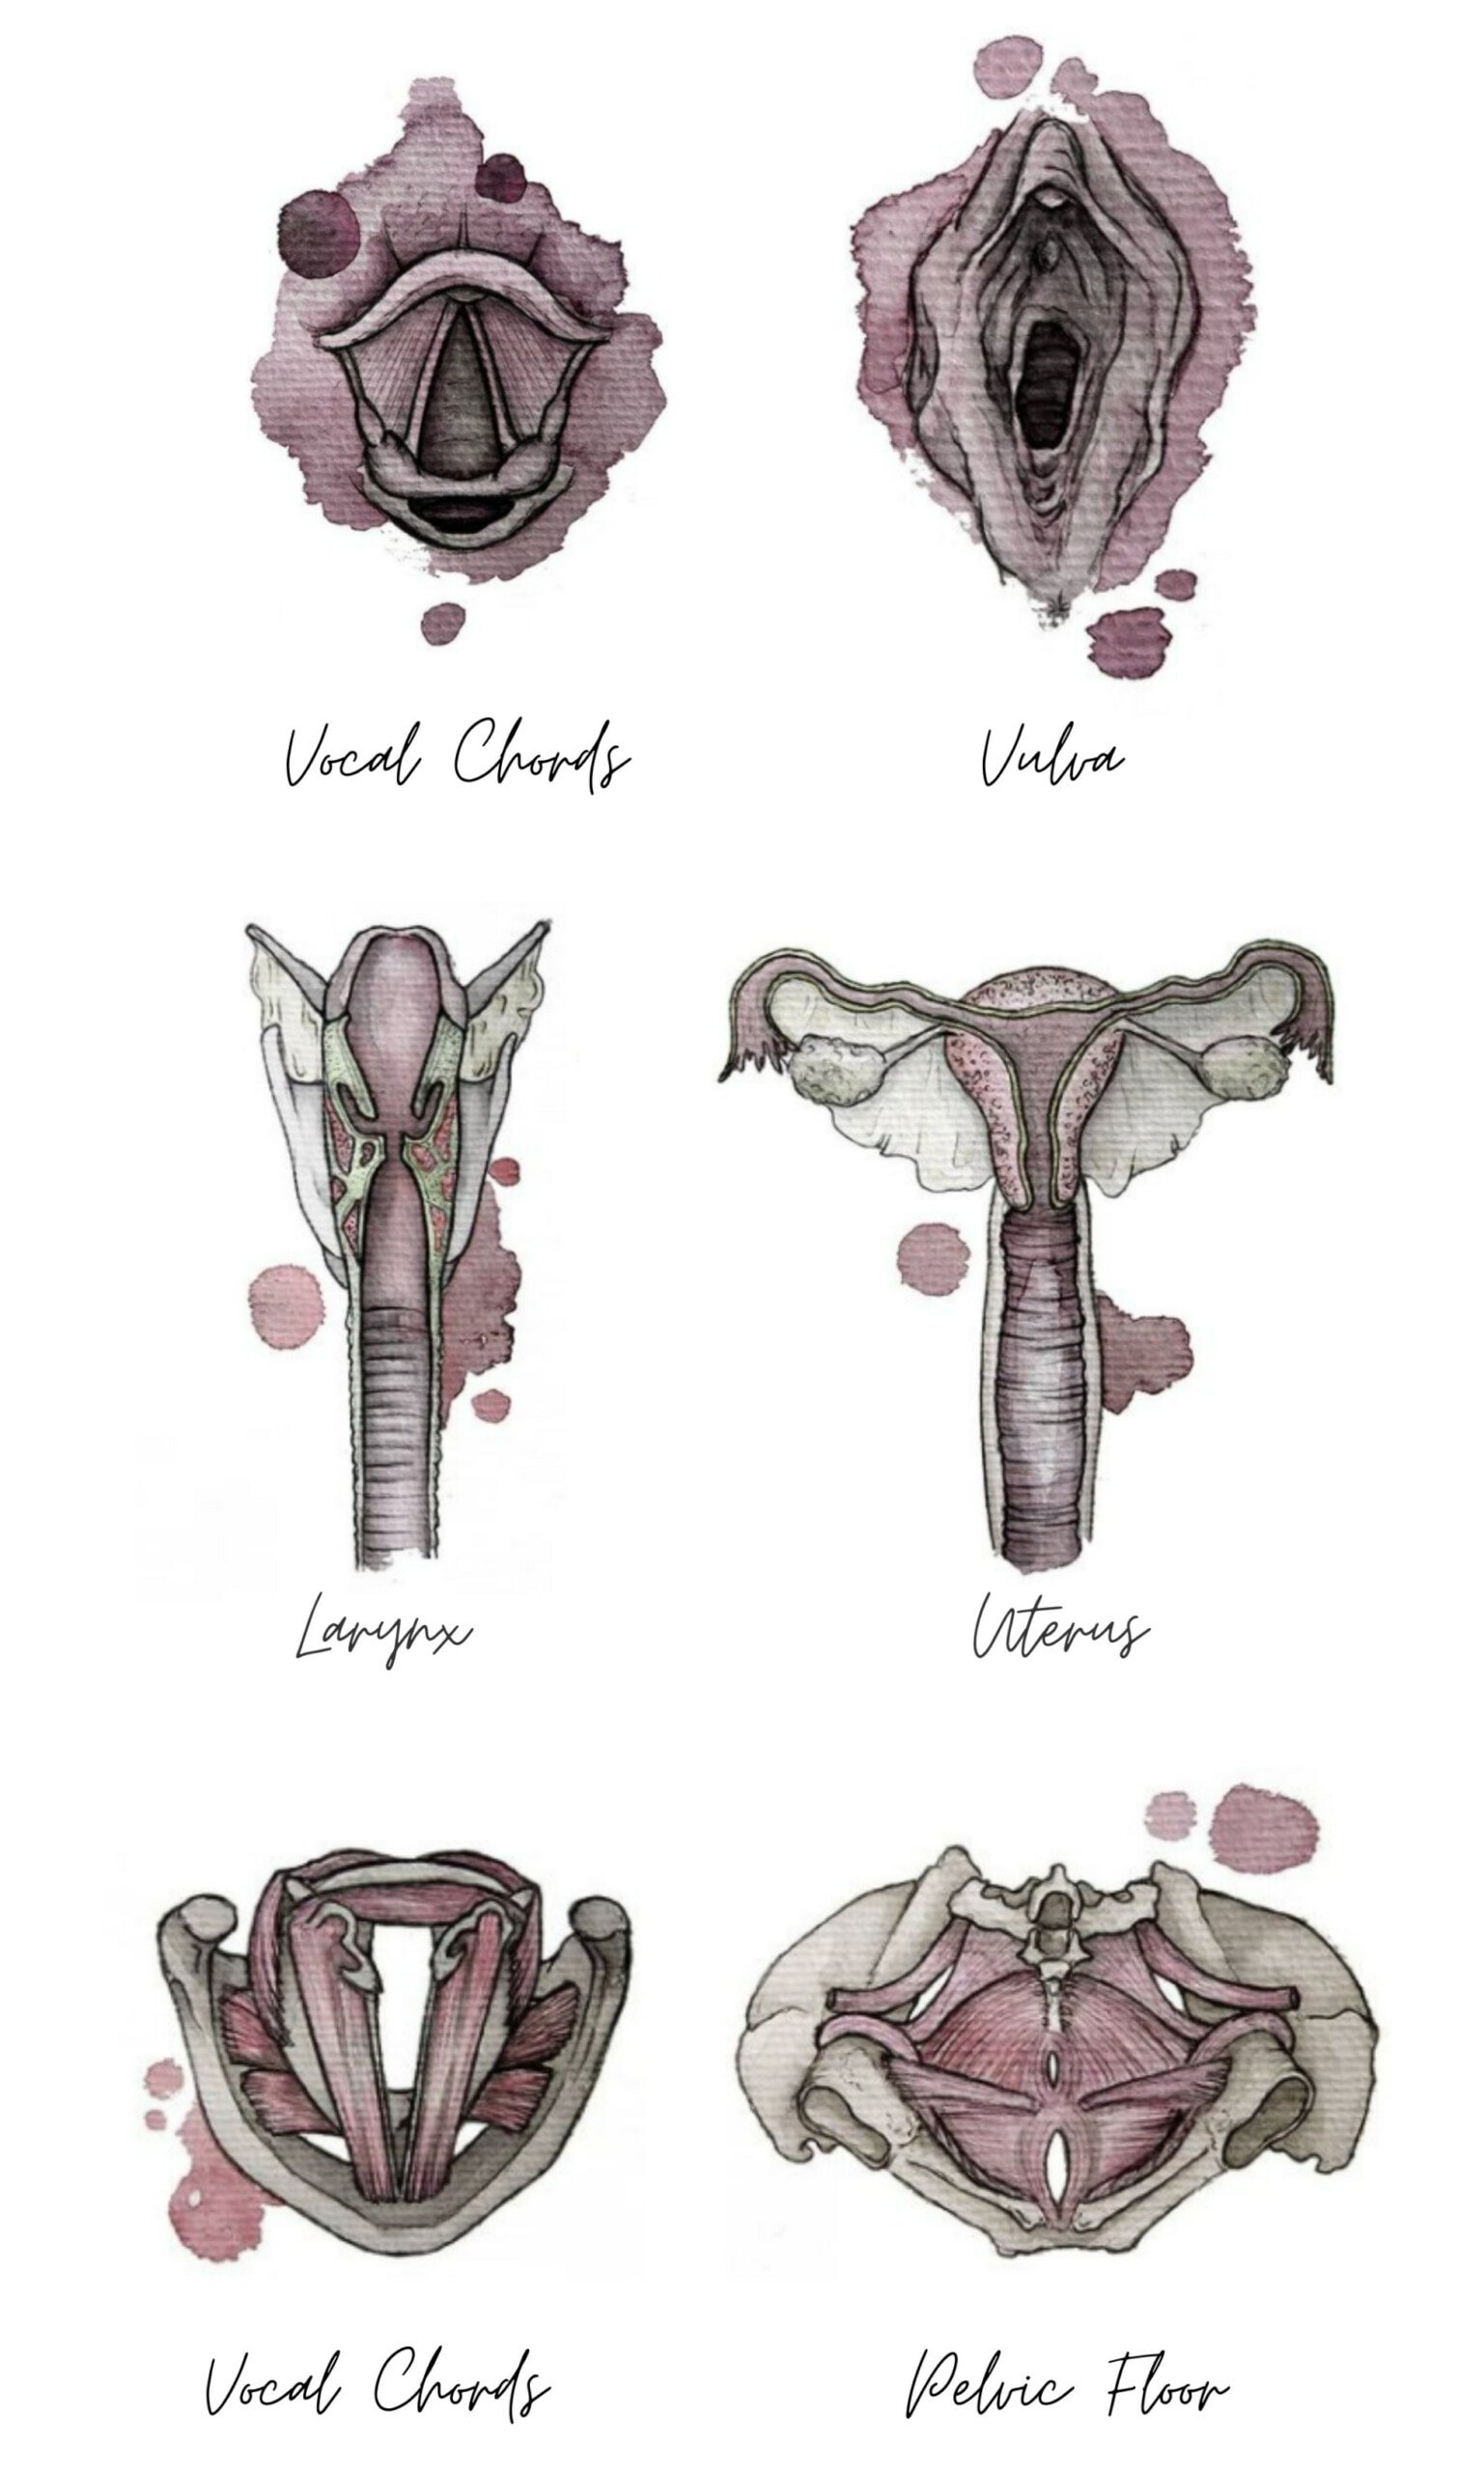 throat and pelvic floor connection - a diagram of each.